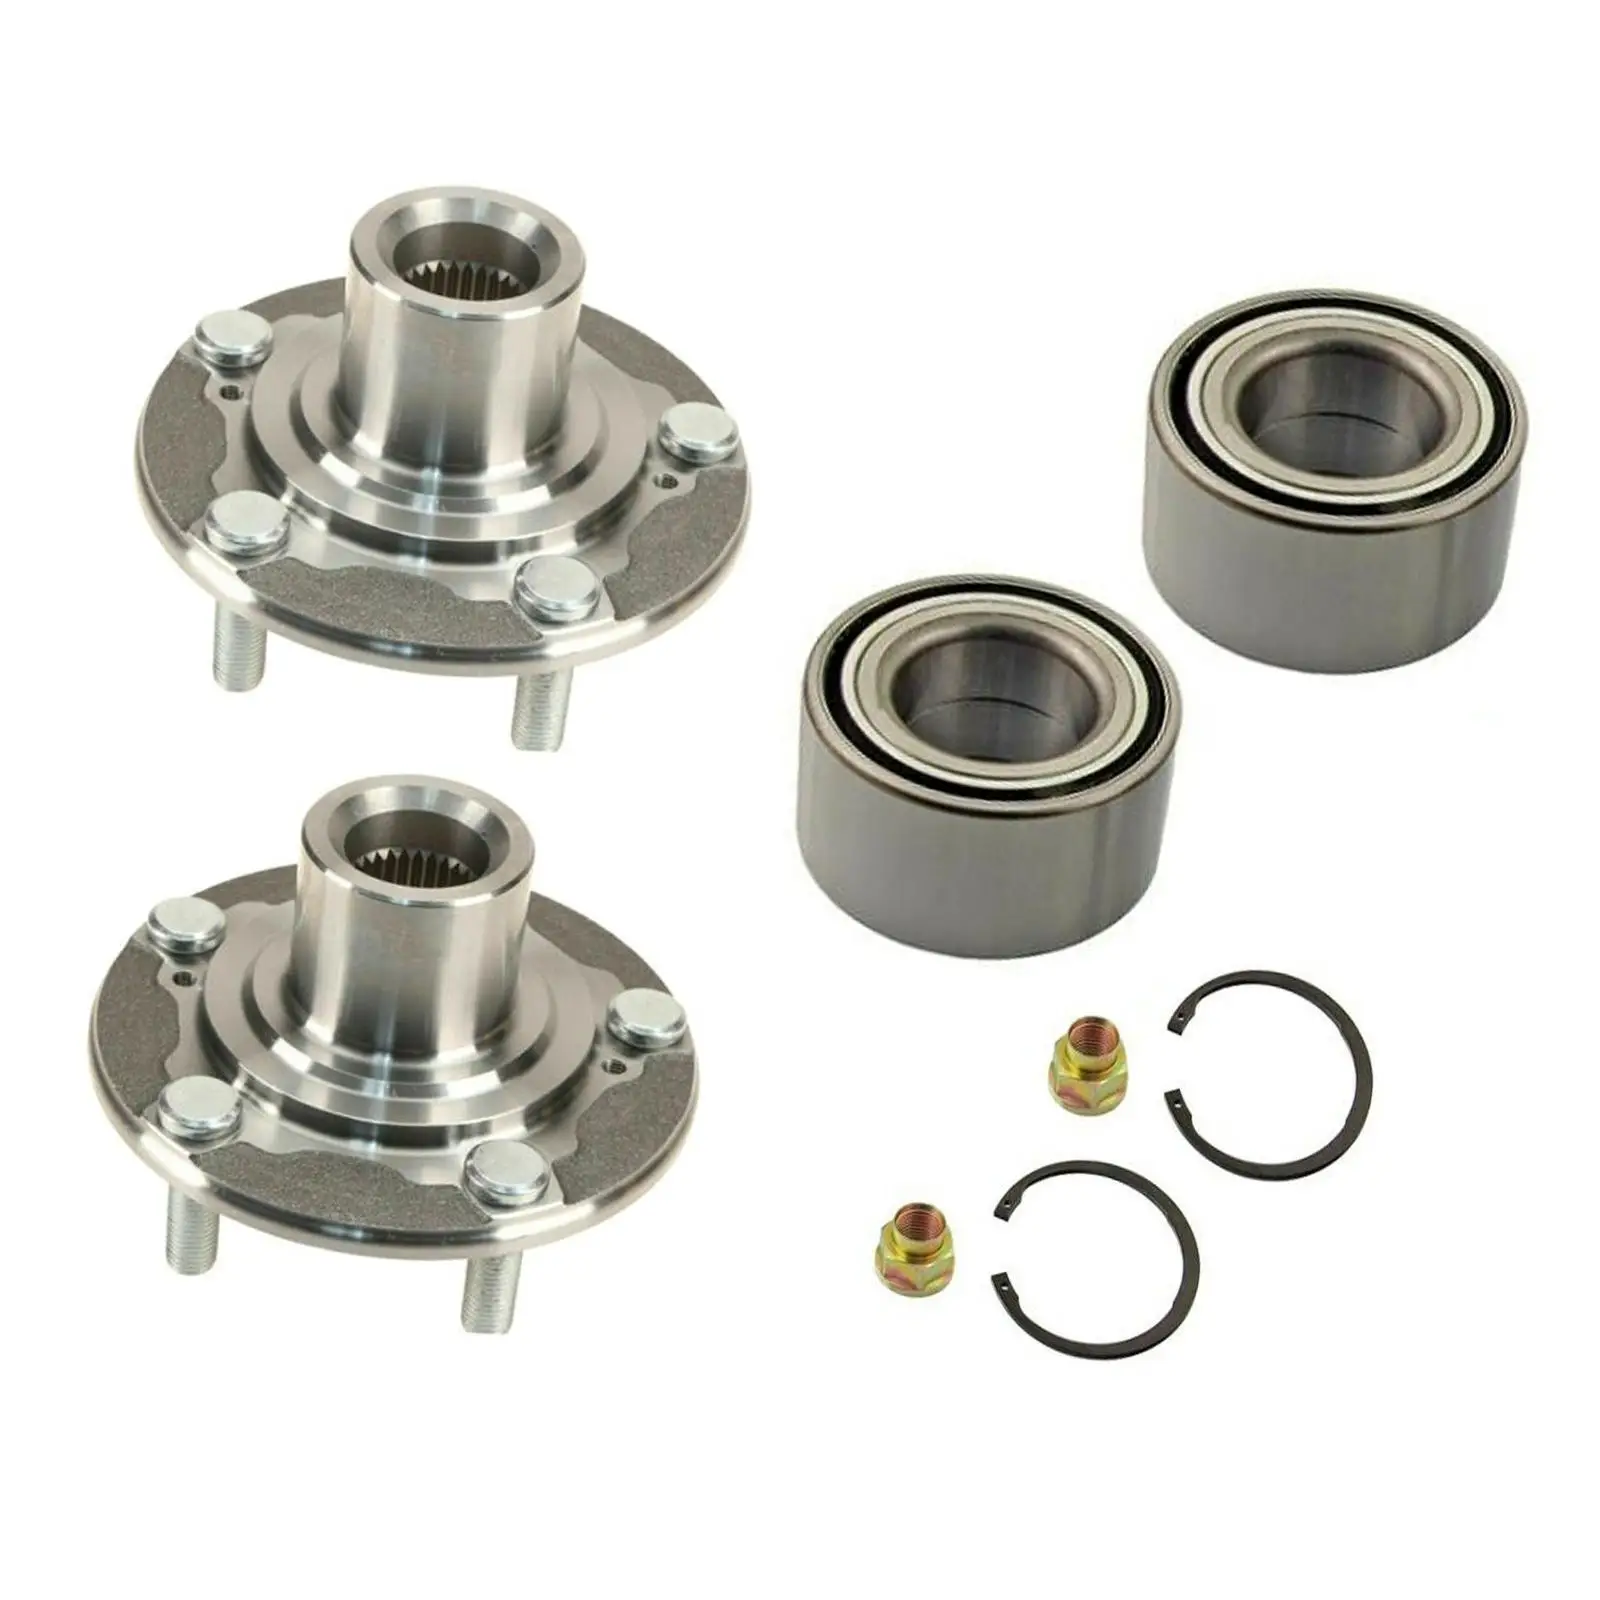 2x Front Wheel Hub and Bearing Repair Kits Replacement Easy Installation 510118 44600-t2f-a01 for Honda Acura Tlx 2015-2019